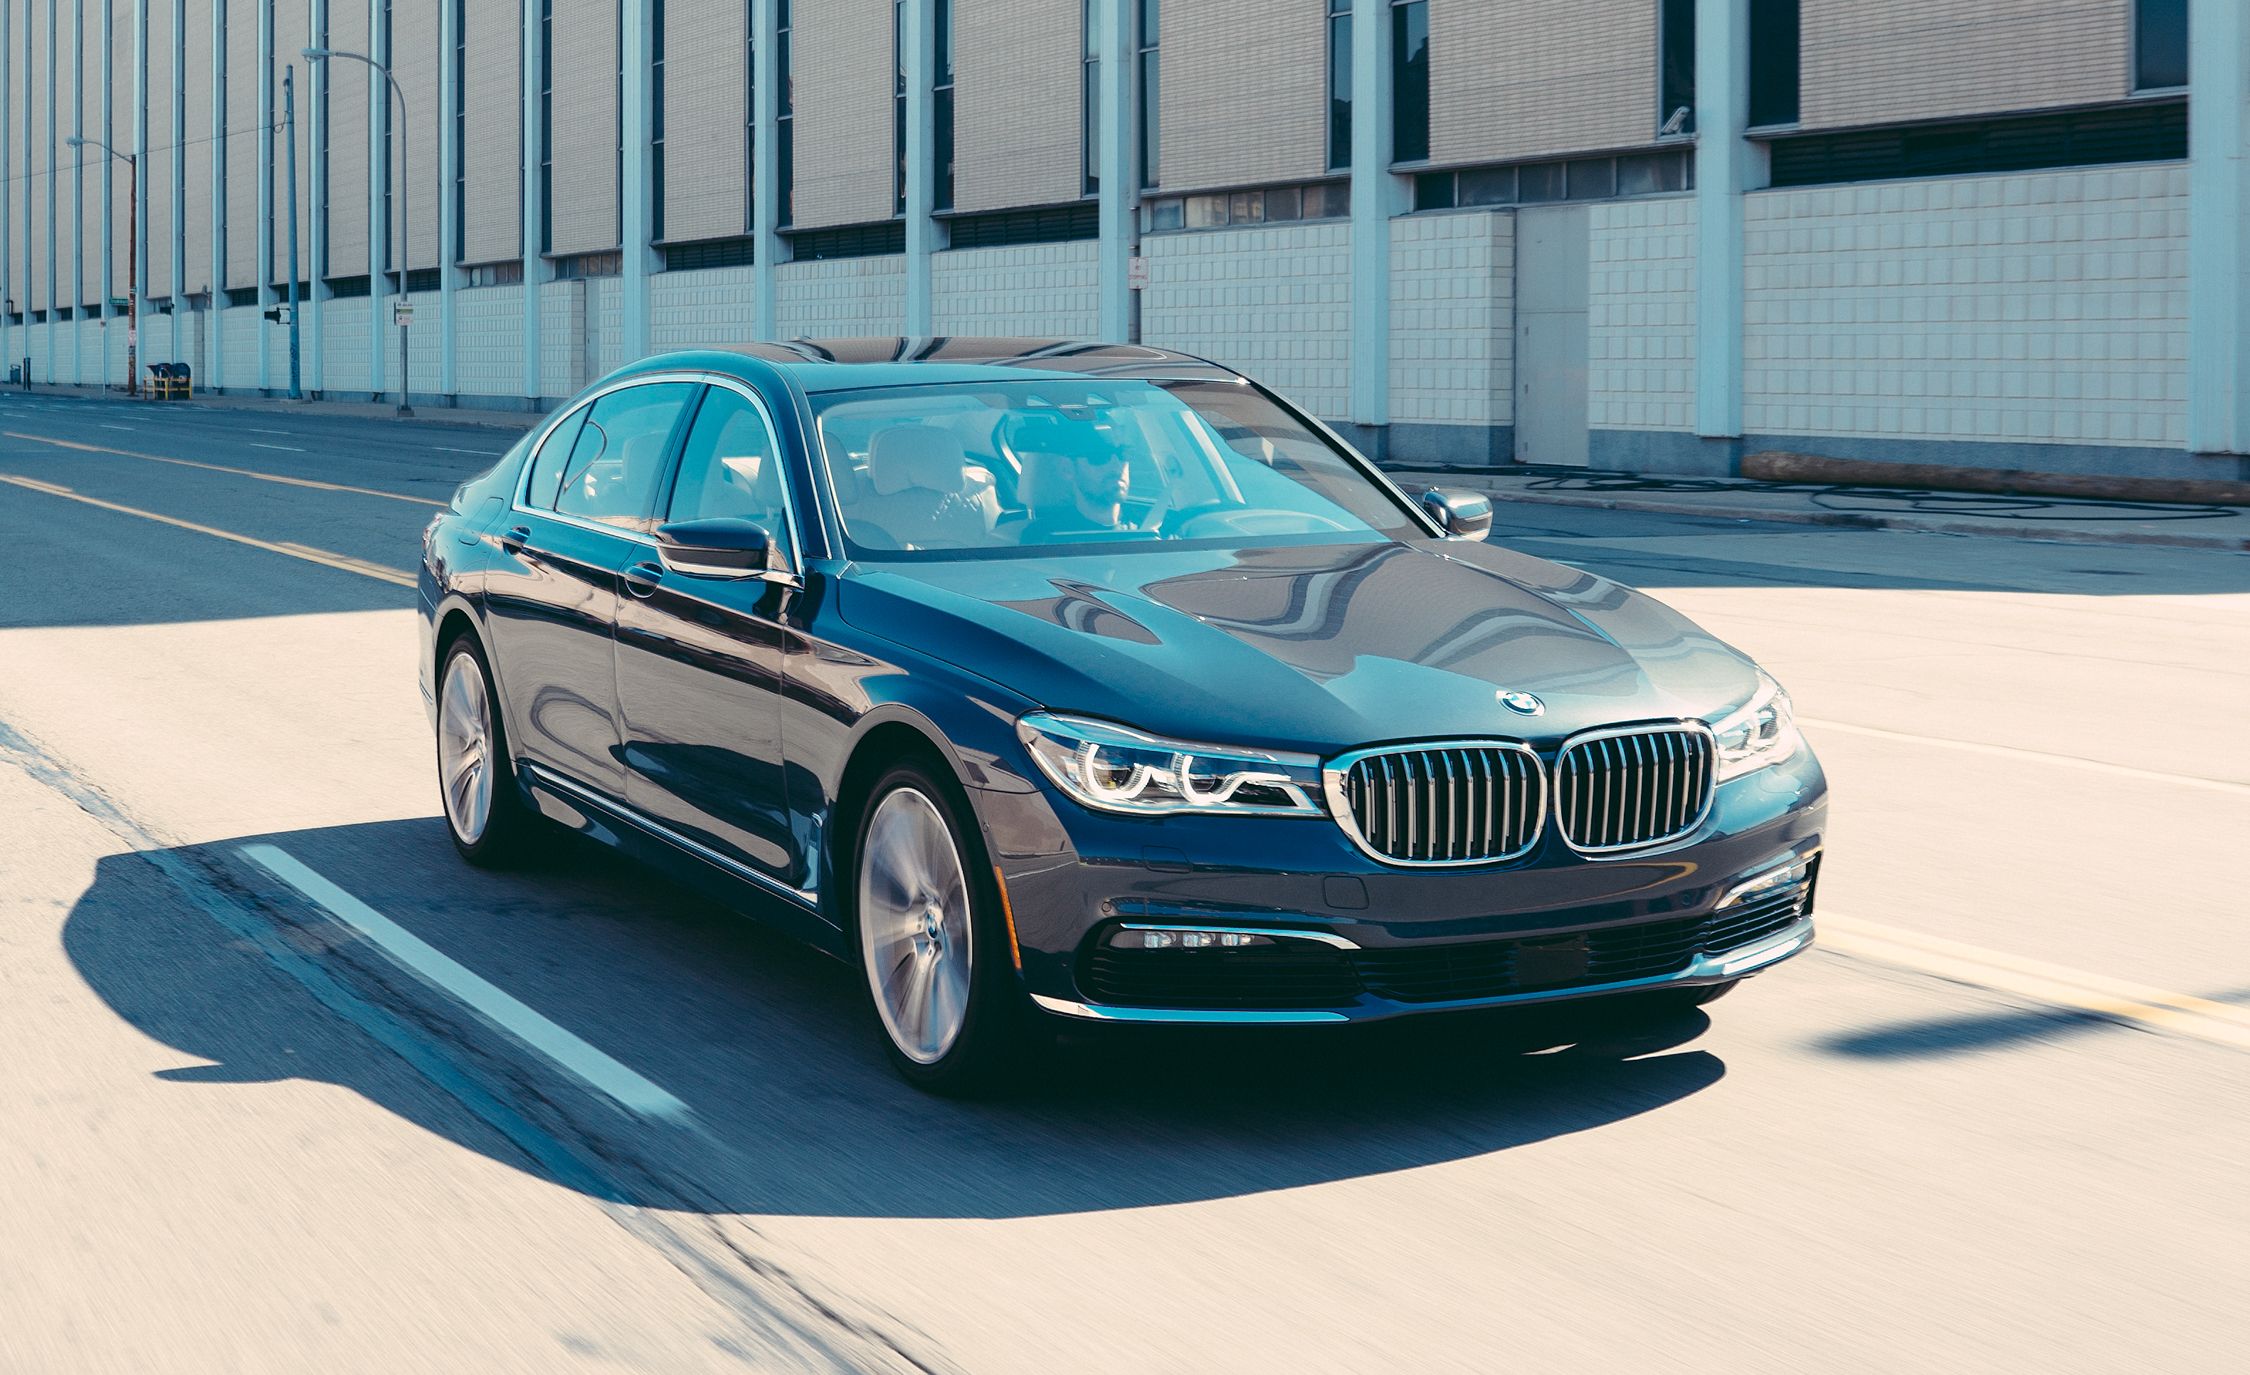 Where To, Boss? 2016 BMW 750i xDrive Tested!